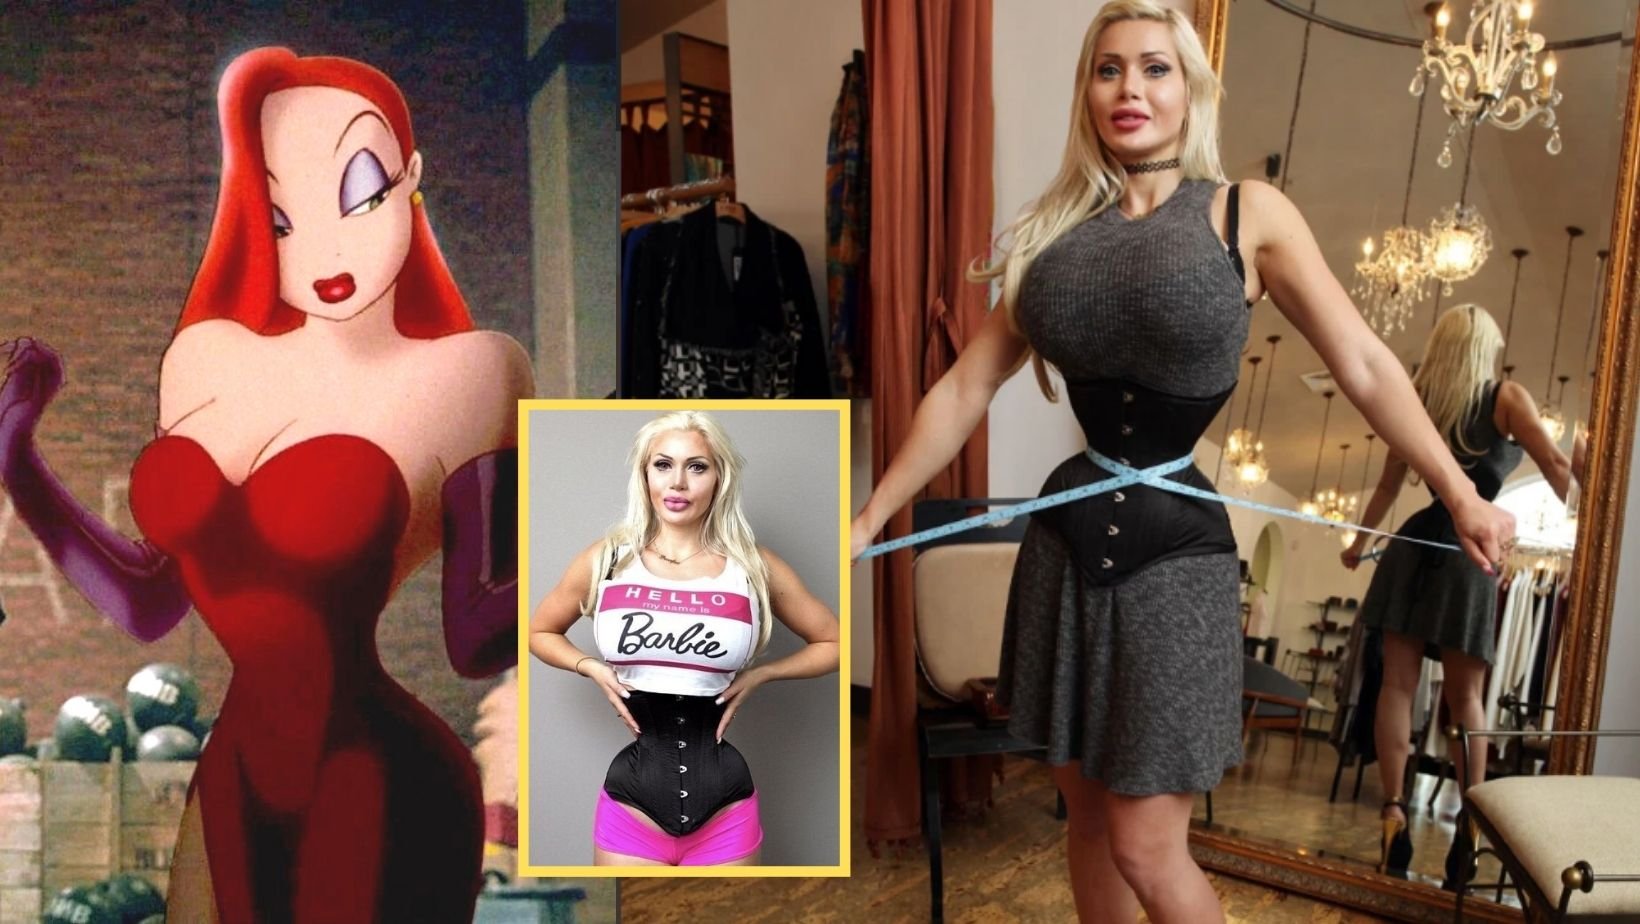 1 16.jpg?resize=1200,630 - Woman Had Her Ribs Removed To Achieve Jessica Rabbit’s 14-Inch Waist